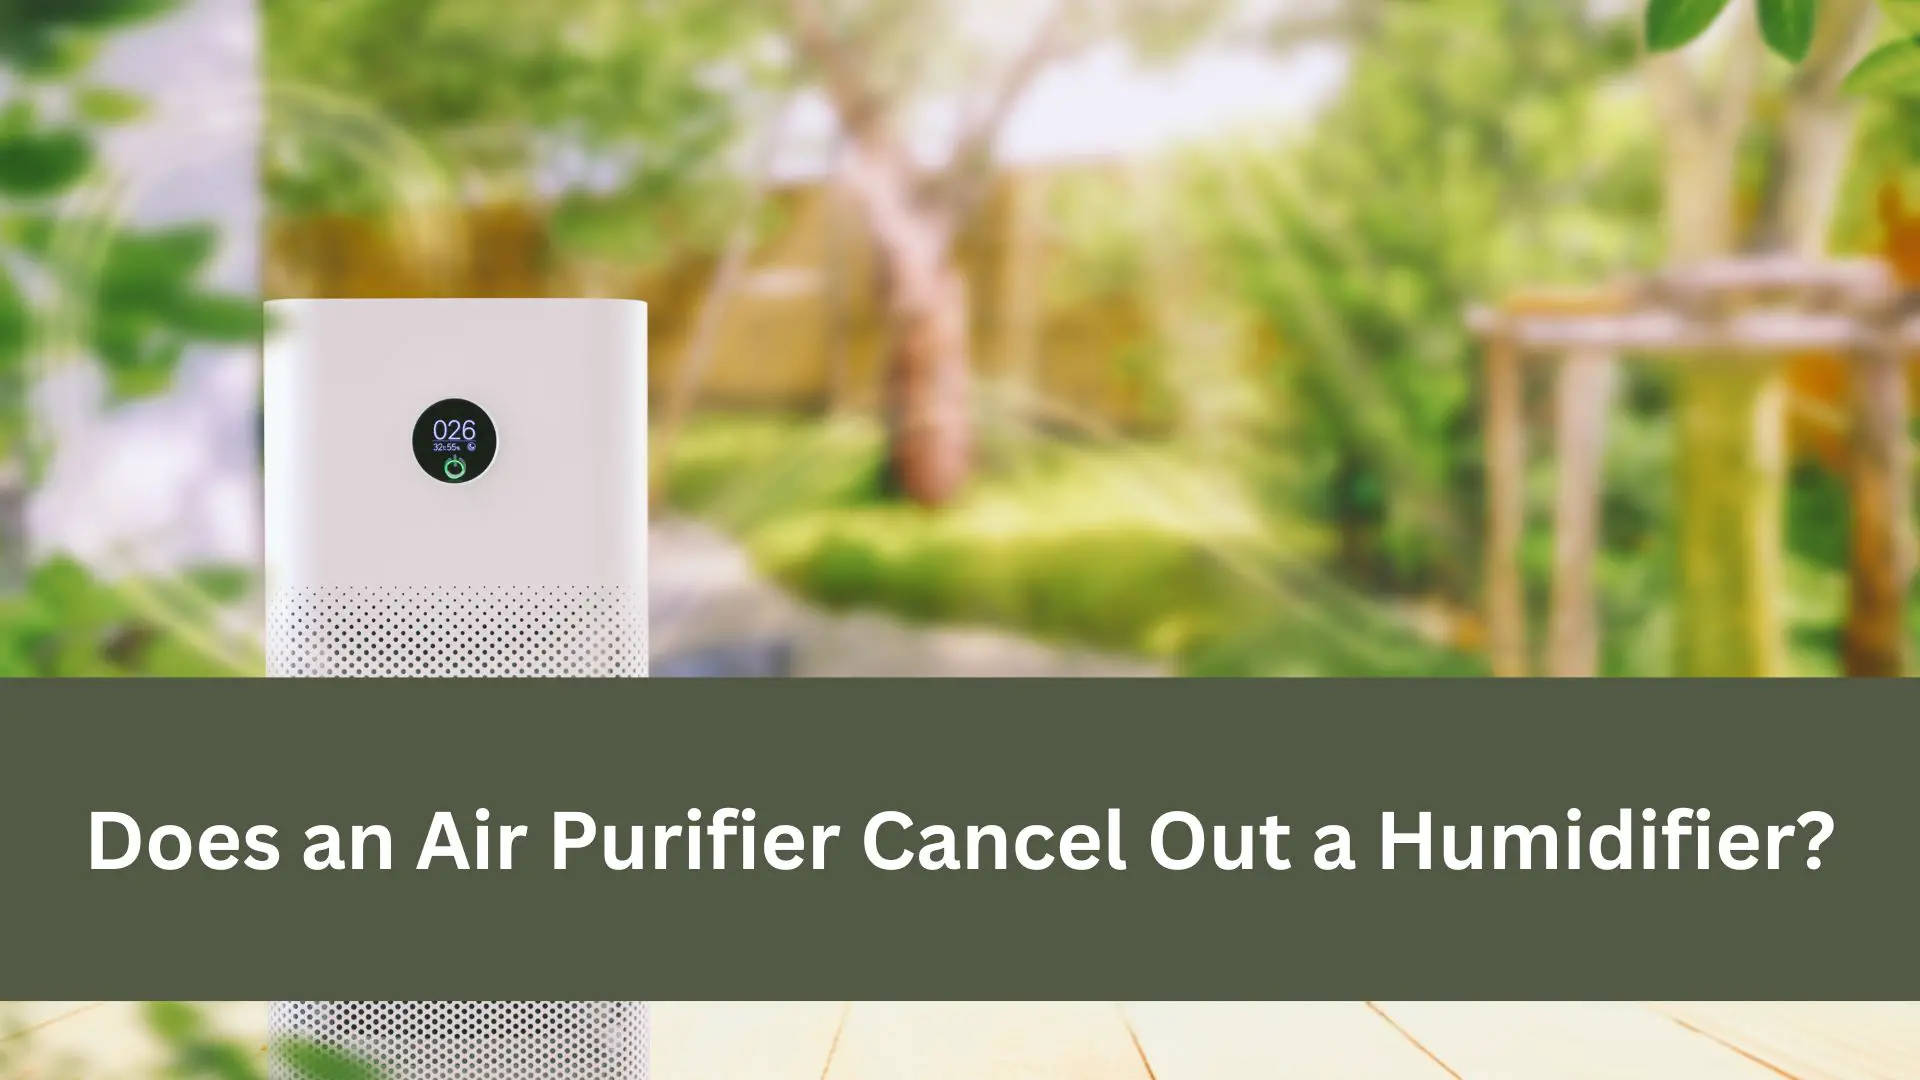 Does an Air Purifier Cancel Out a Humidifier